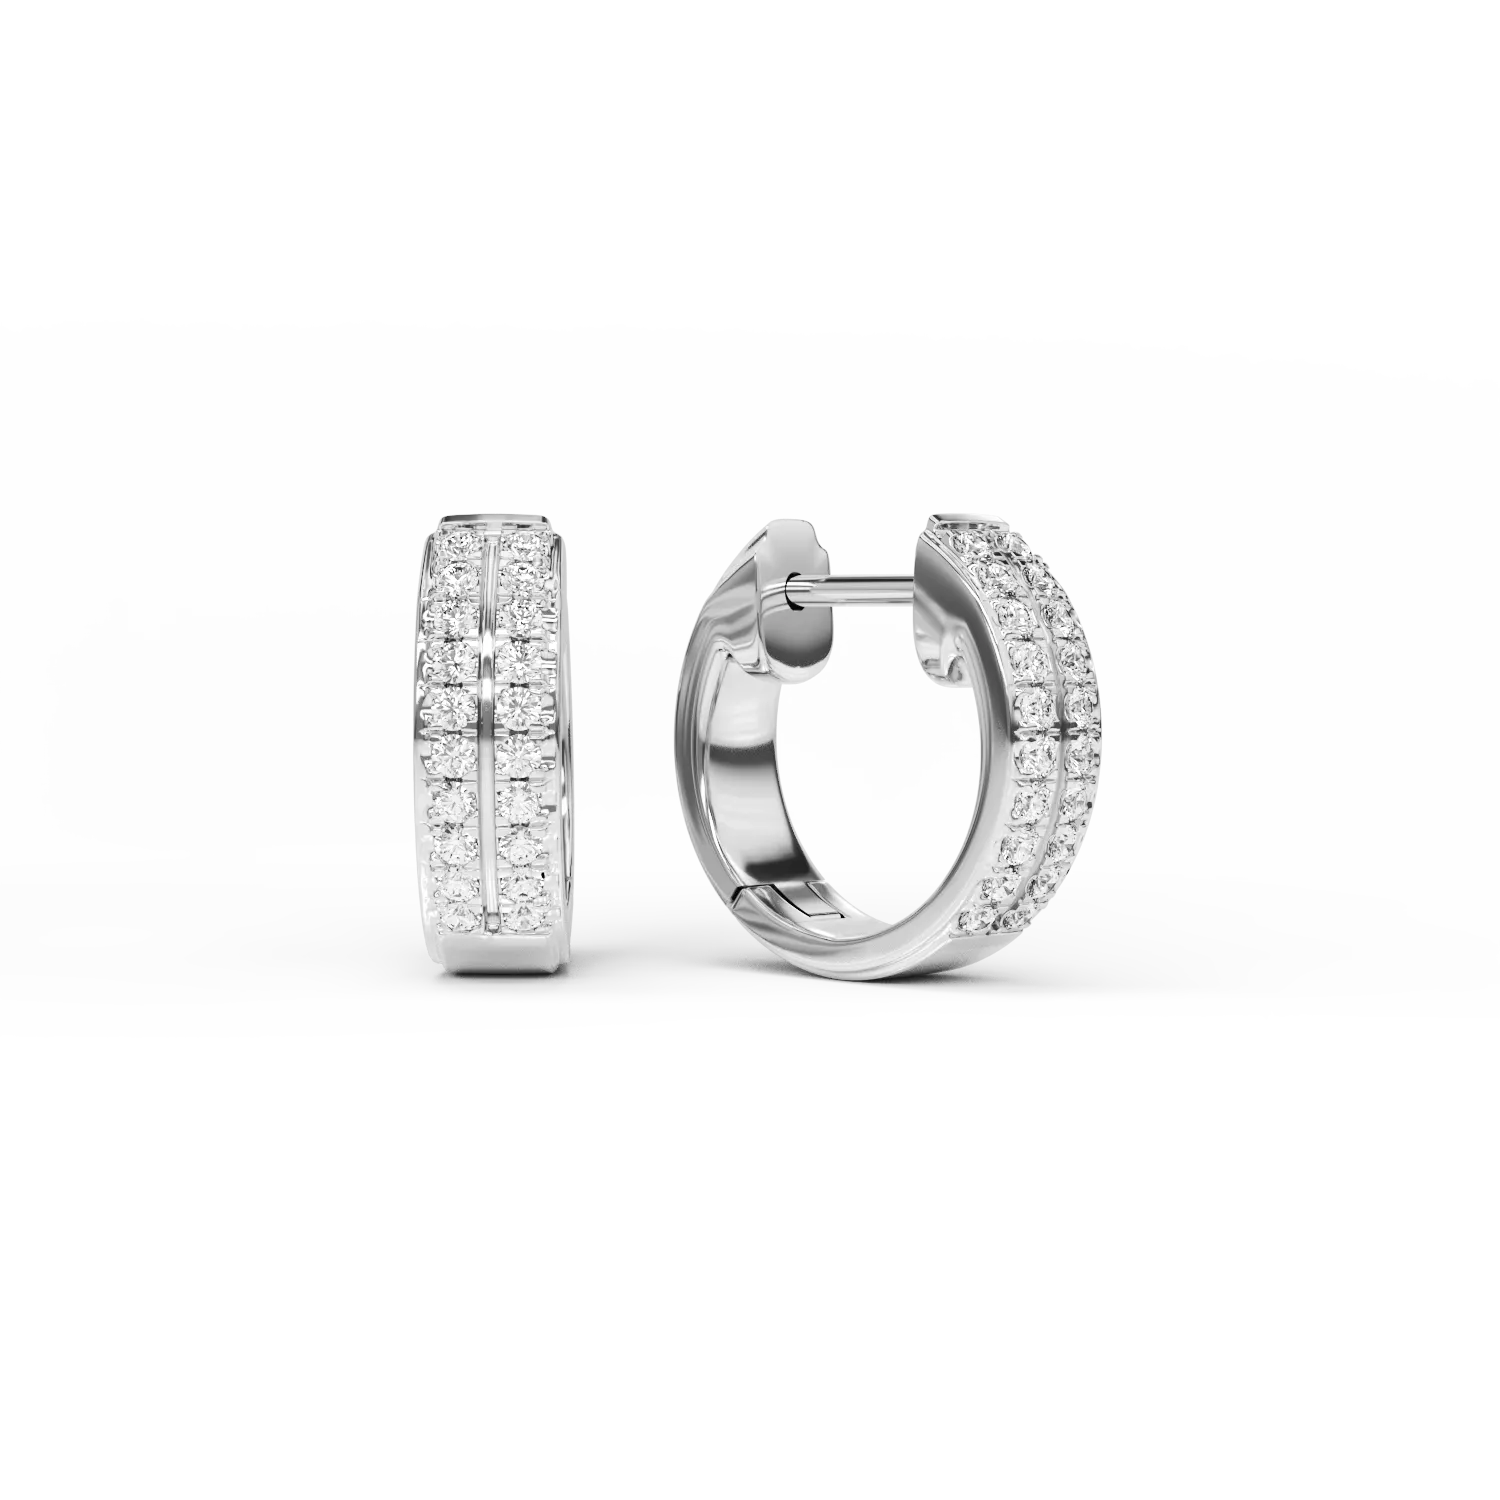 18K white gold earrings with 0.32ct diamonds